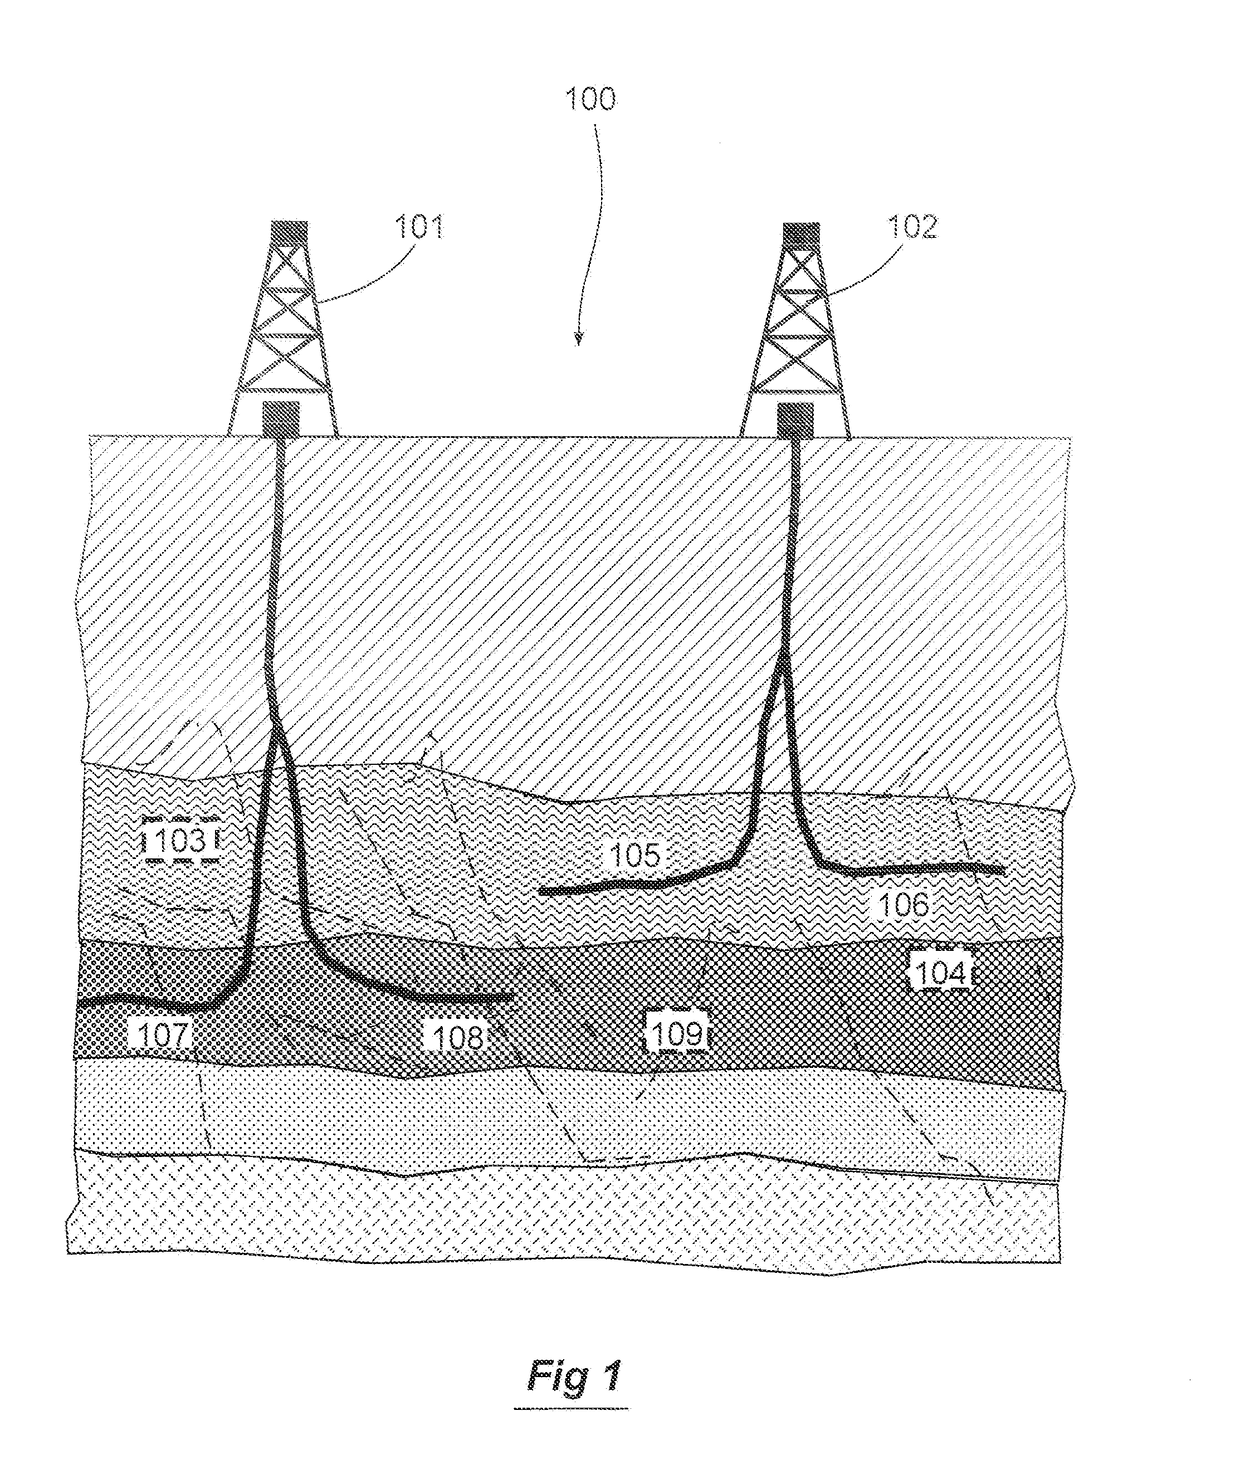 Method For Modeling Stimulated Reservoir Properties Resulting From Hydraulic Fracturing In Naturally Fractured Reservoirs